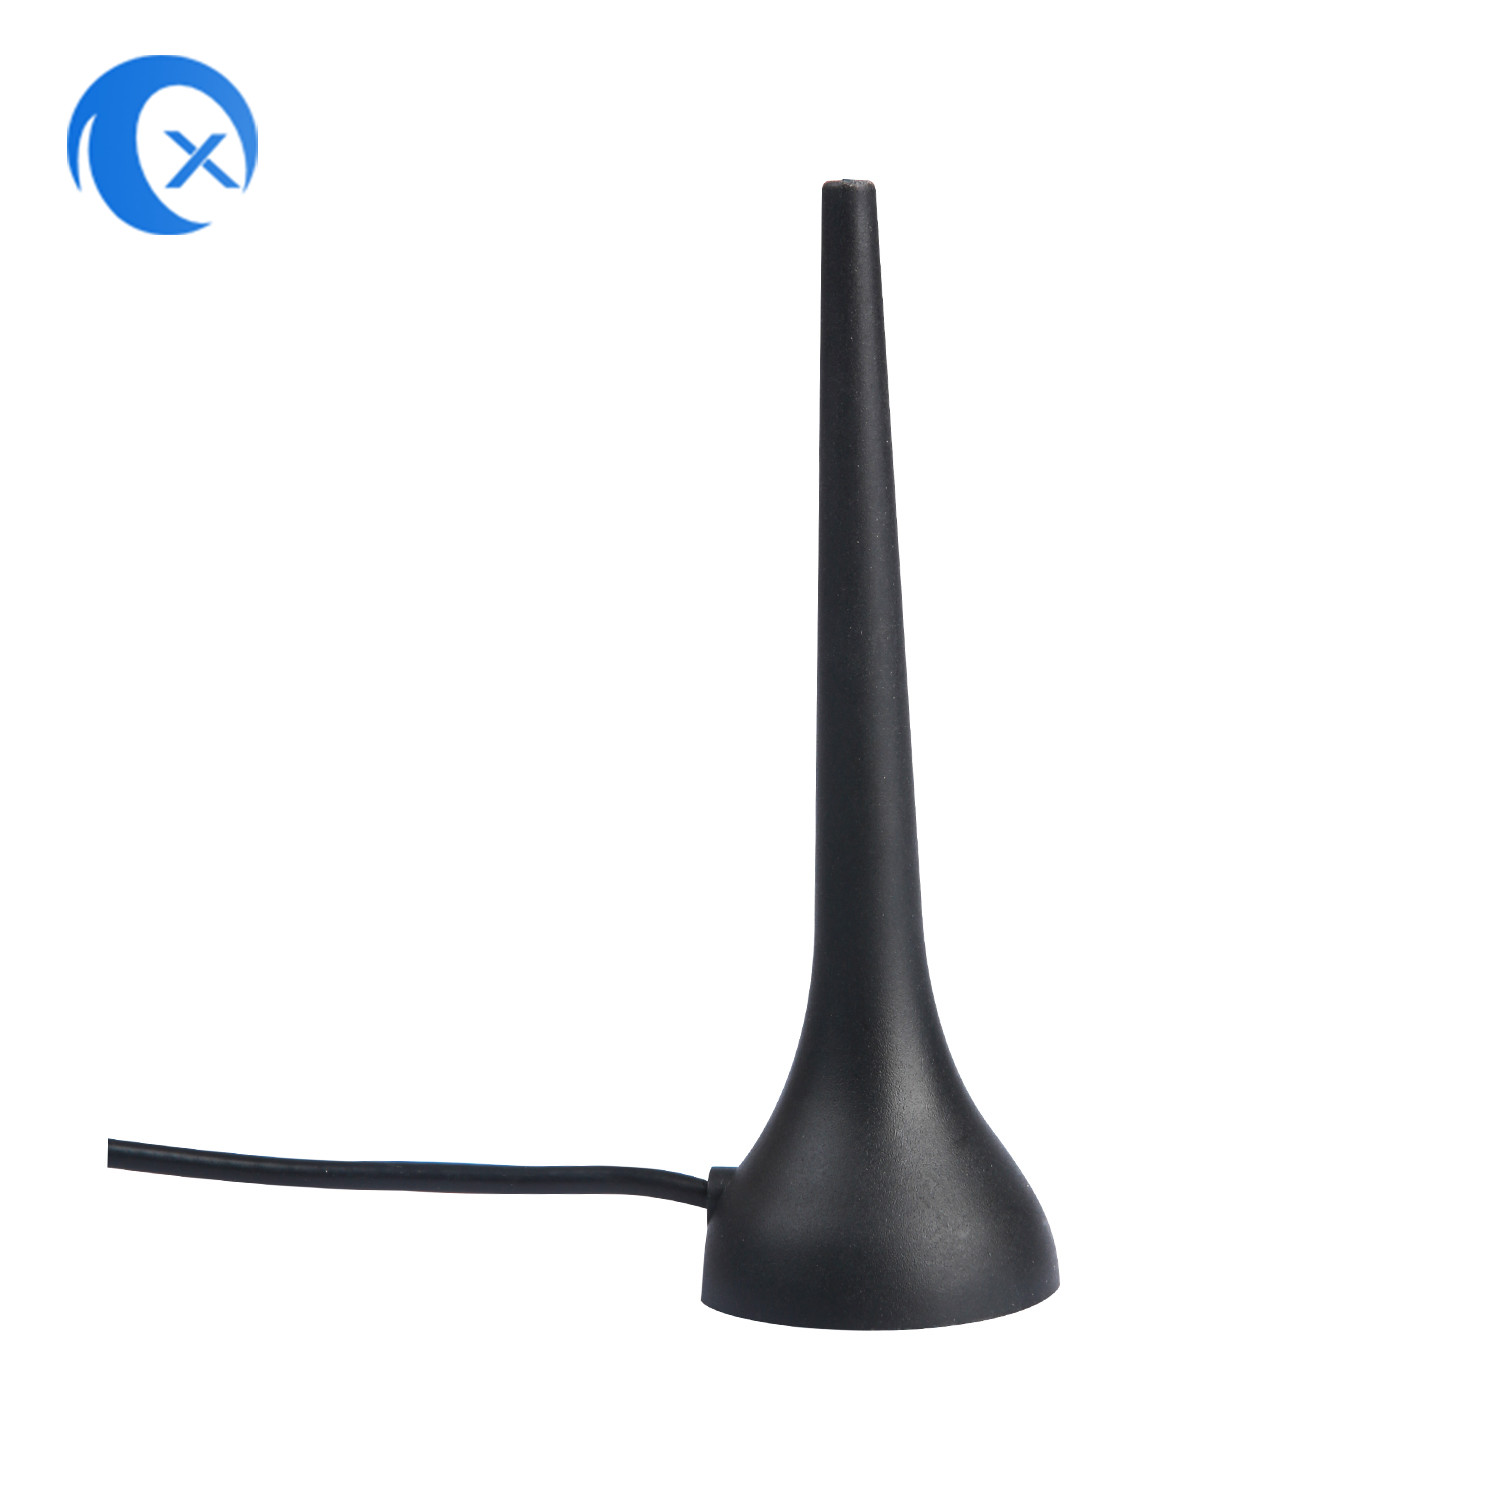 China Magnetic Base 900 1800 MHz GSM GPRS Antenna With MMCX Male Connector factory